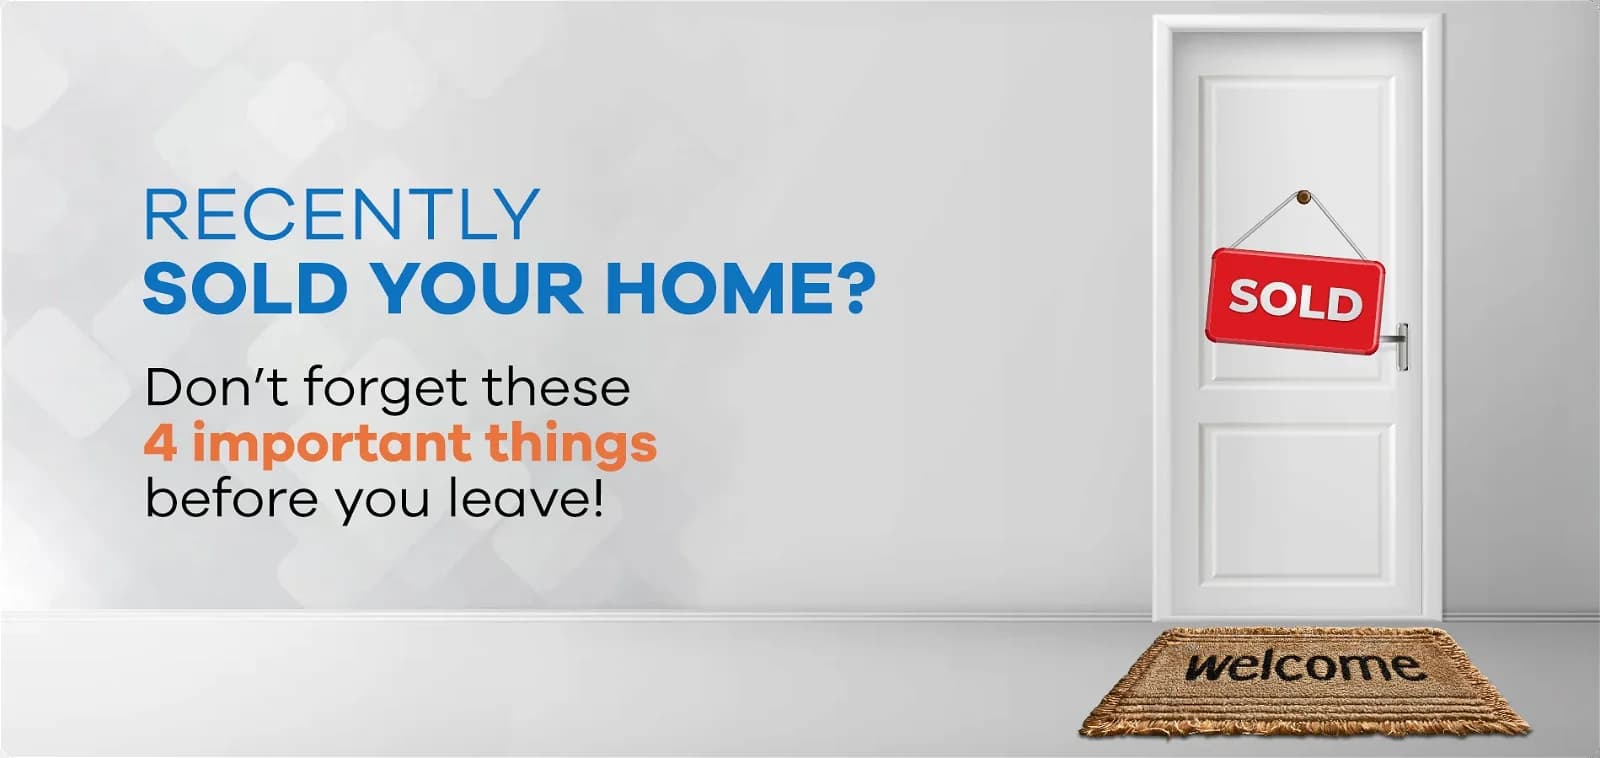 Recently Sold Your Home? Don’t Forget These 4 Important Things Before You Leave!